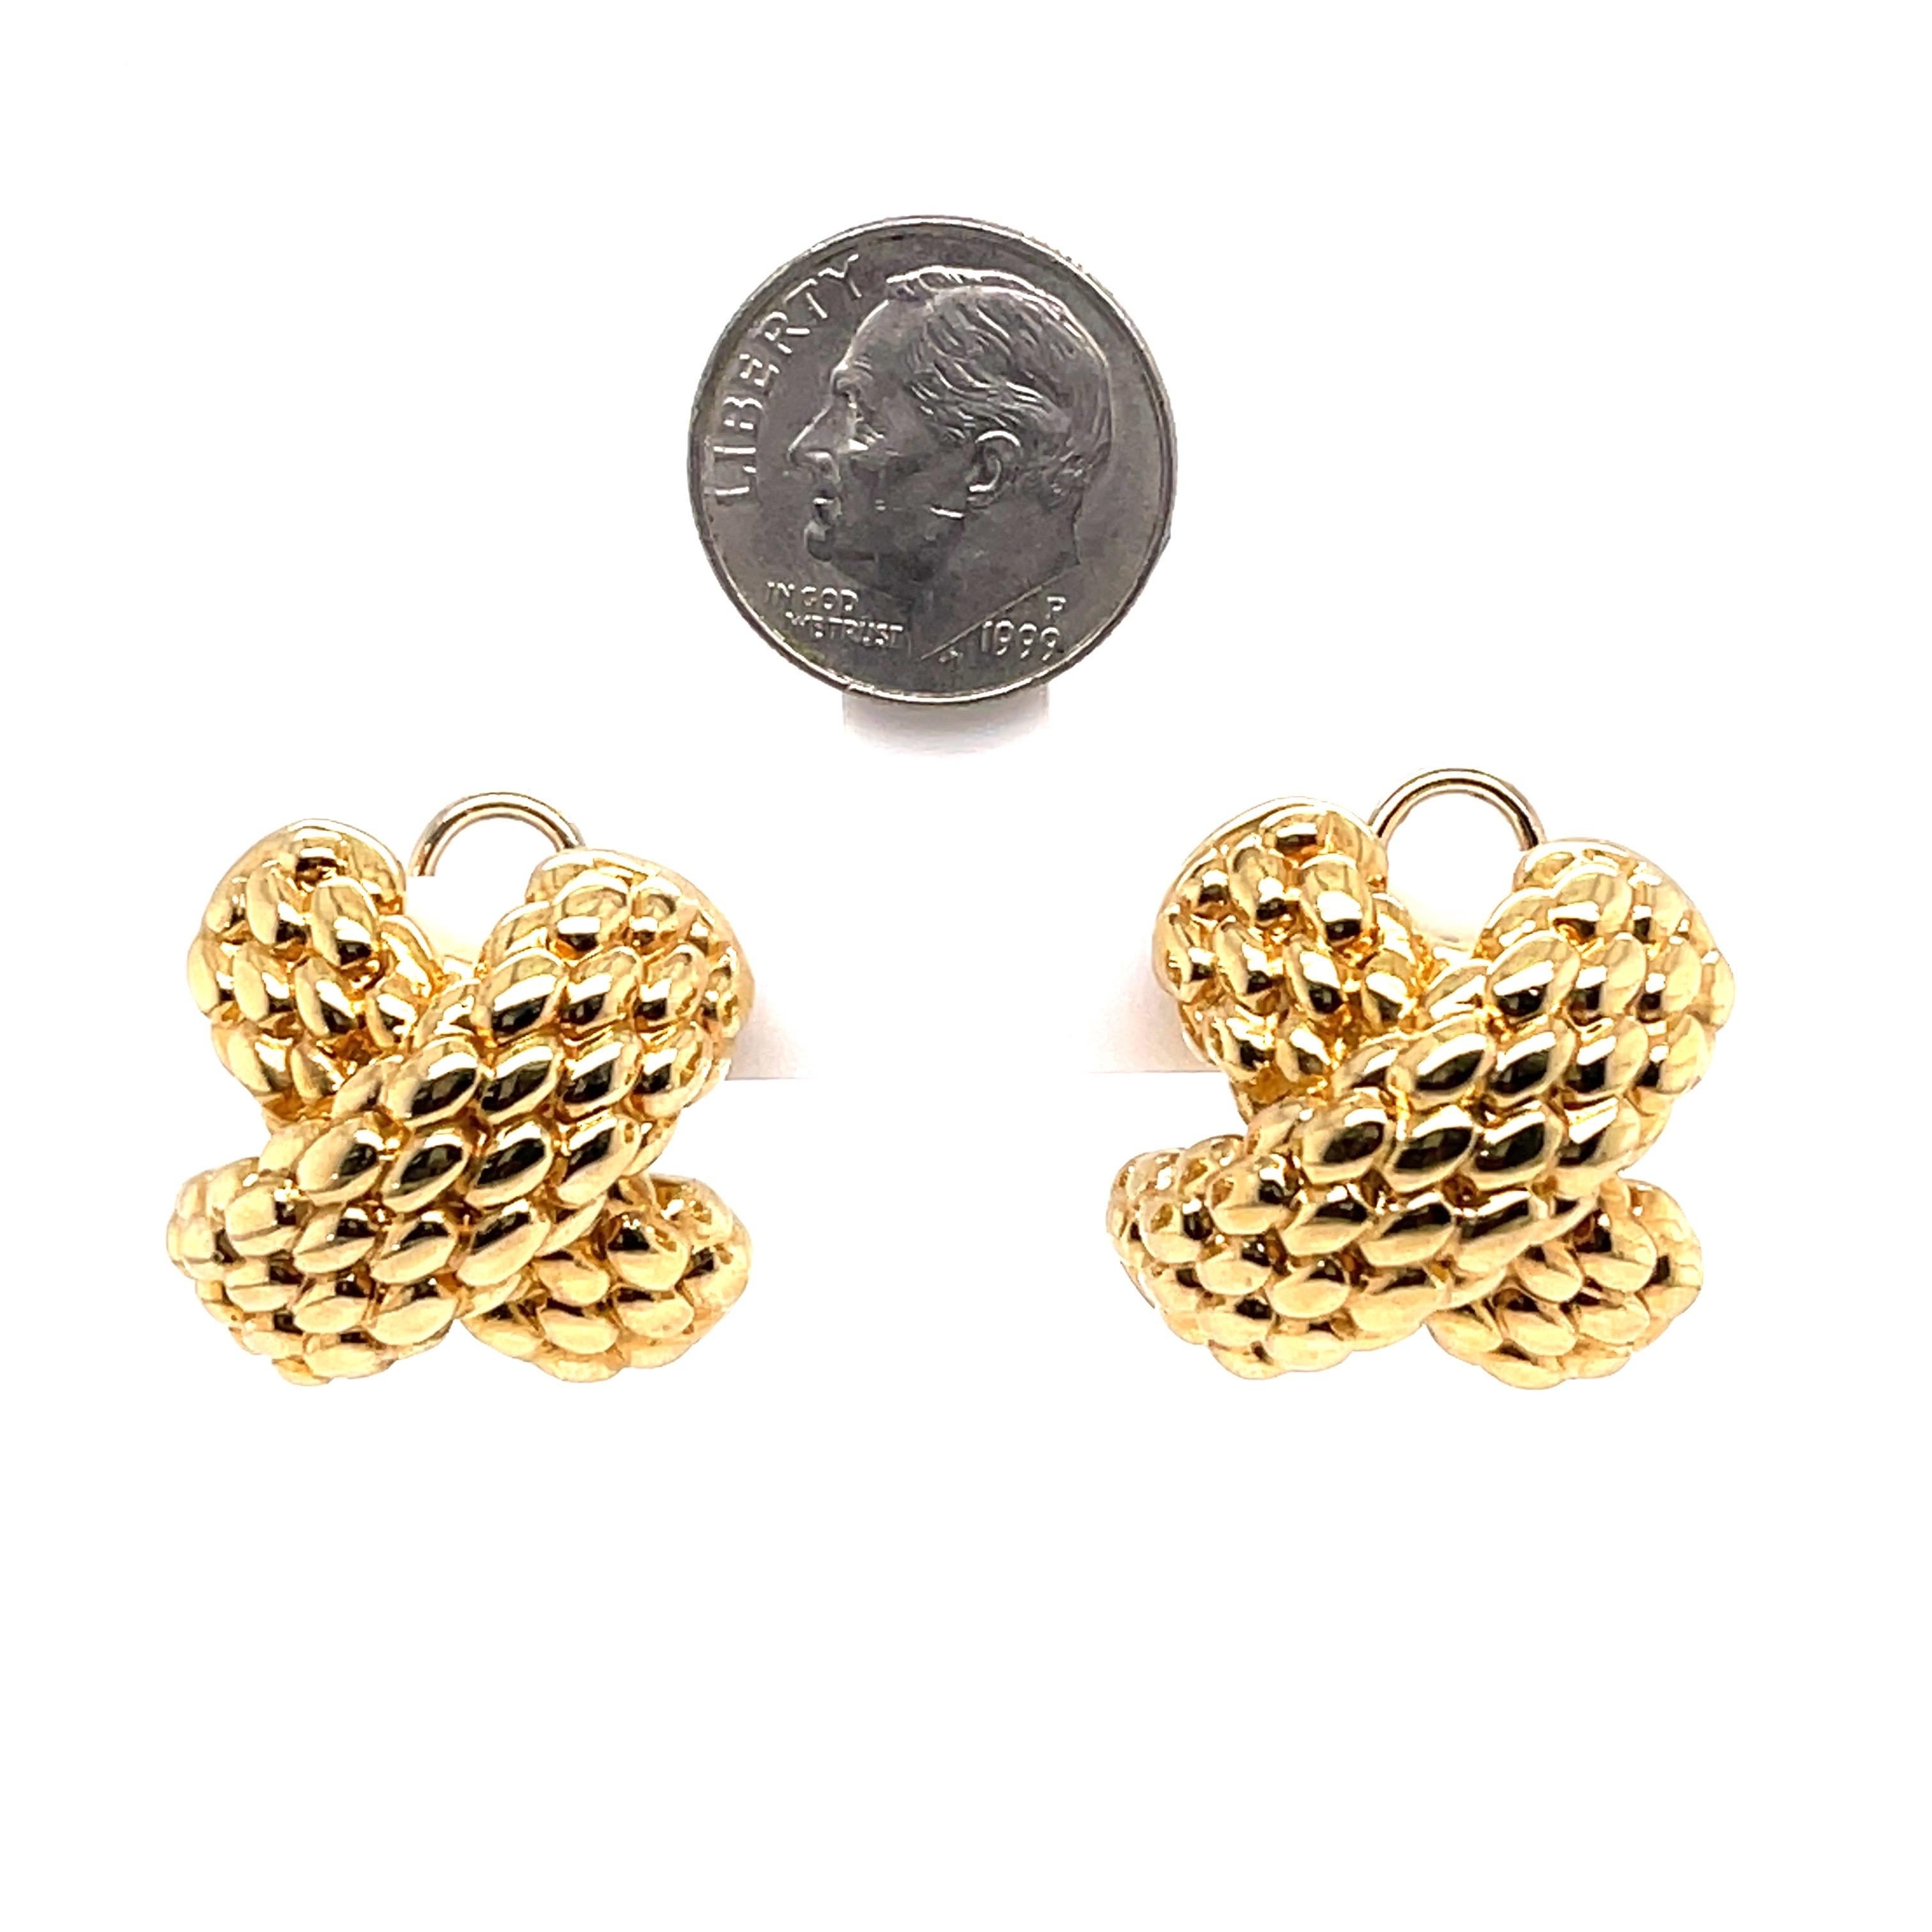 18 Karat Yellow Gold earrings featuring an X design in a textured motif weighing 11 grams. Made in Italy